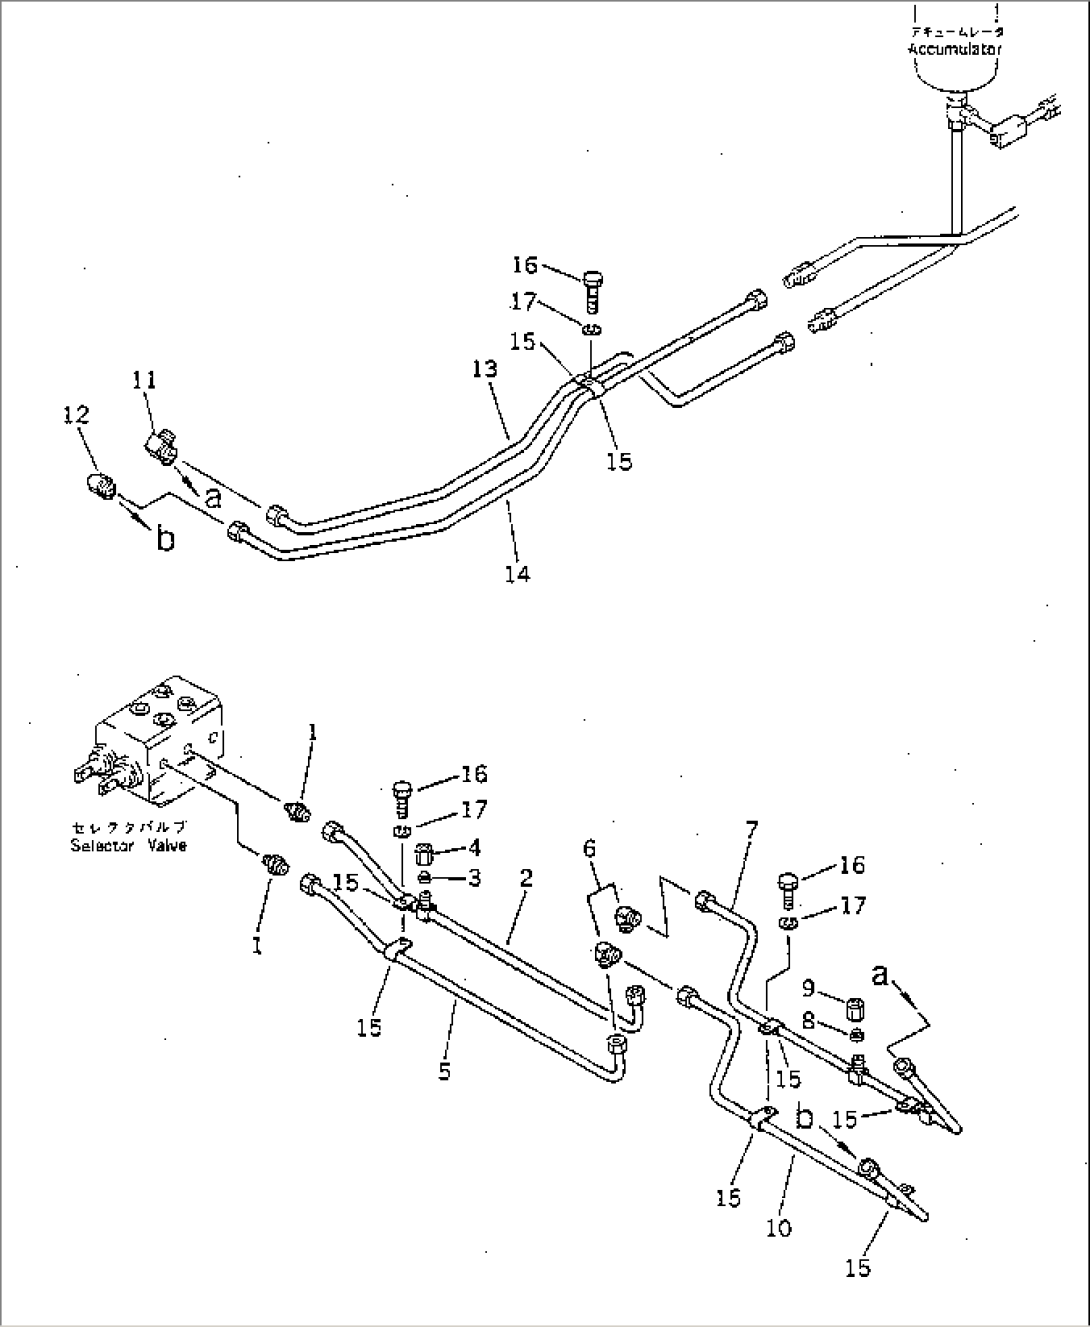 HYDRAULIC PIPING (WINCH MOTOR TO ACCUMULATOR TO SELECTOR VALVE) (1/2)